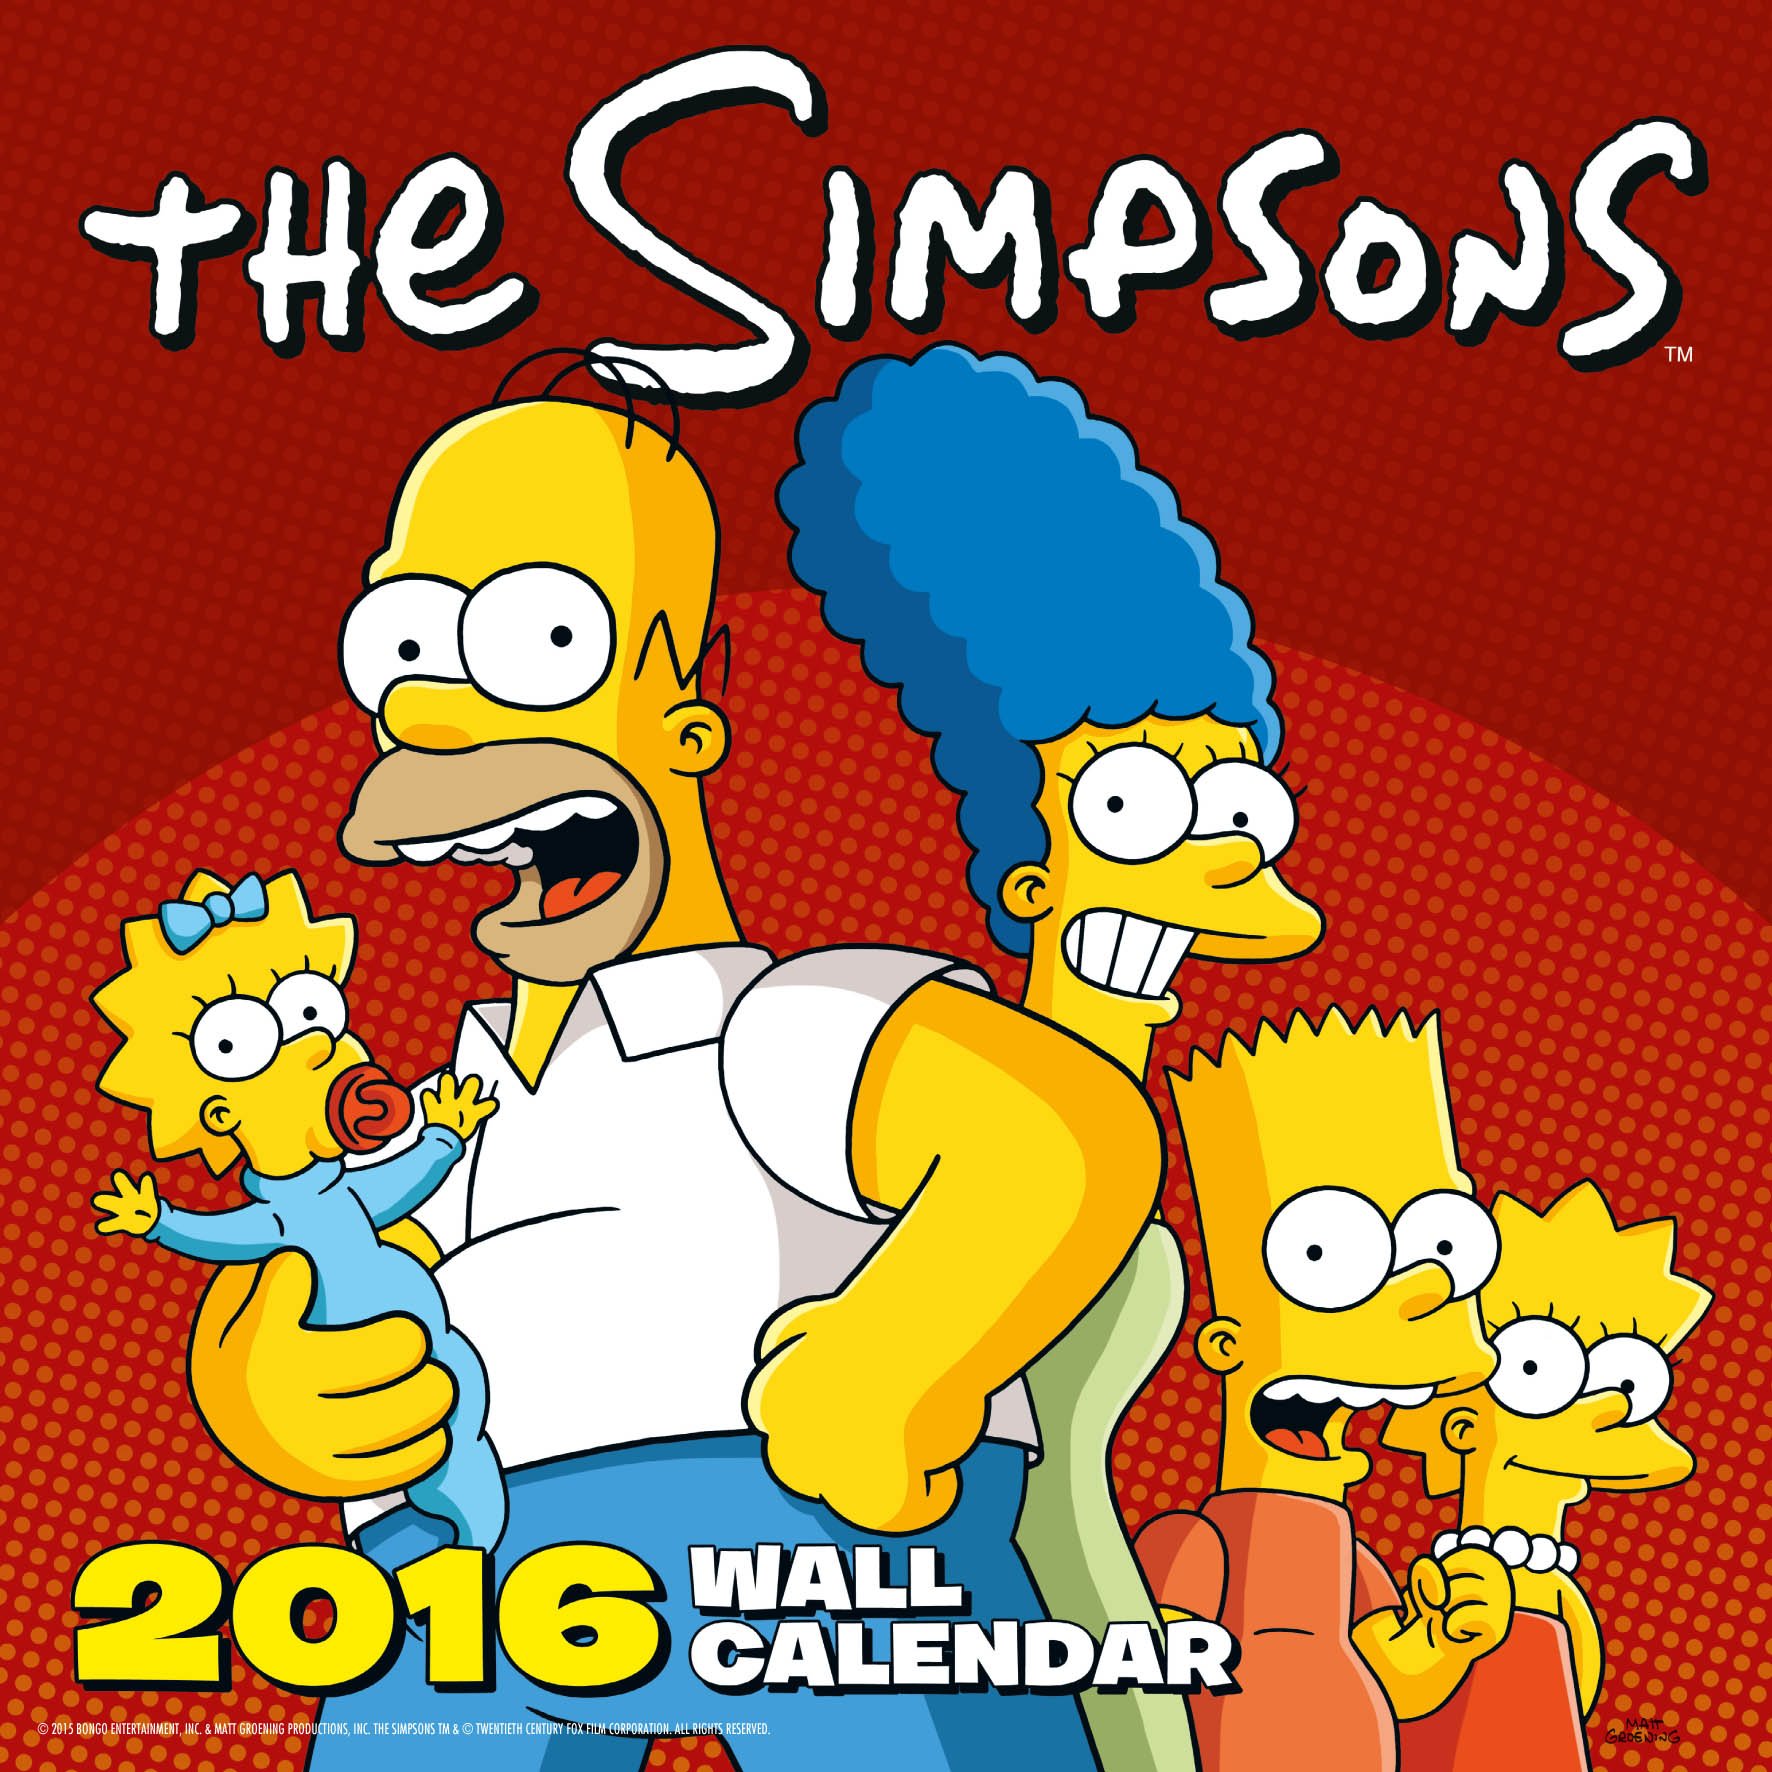 The Simpsons Calendar 2016 Wikisimpsons, the Simpsons Wiki